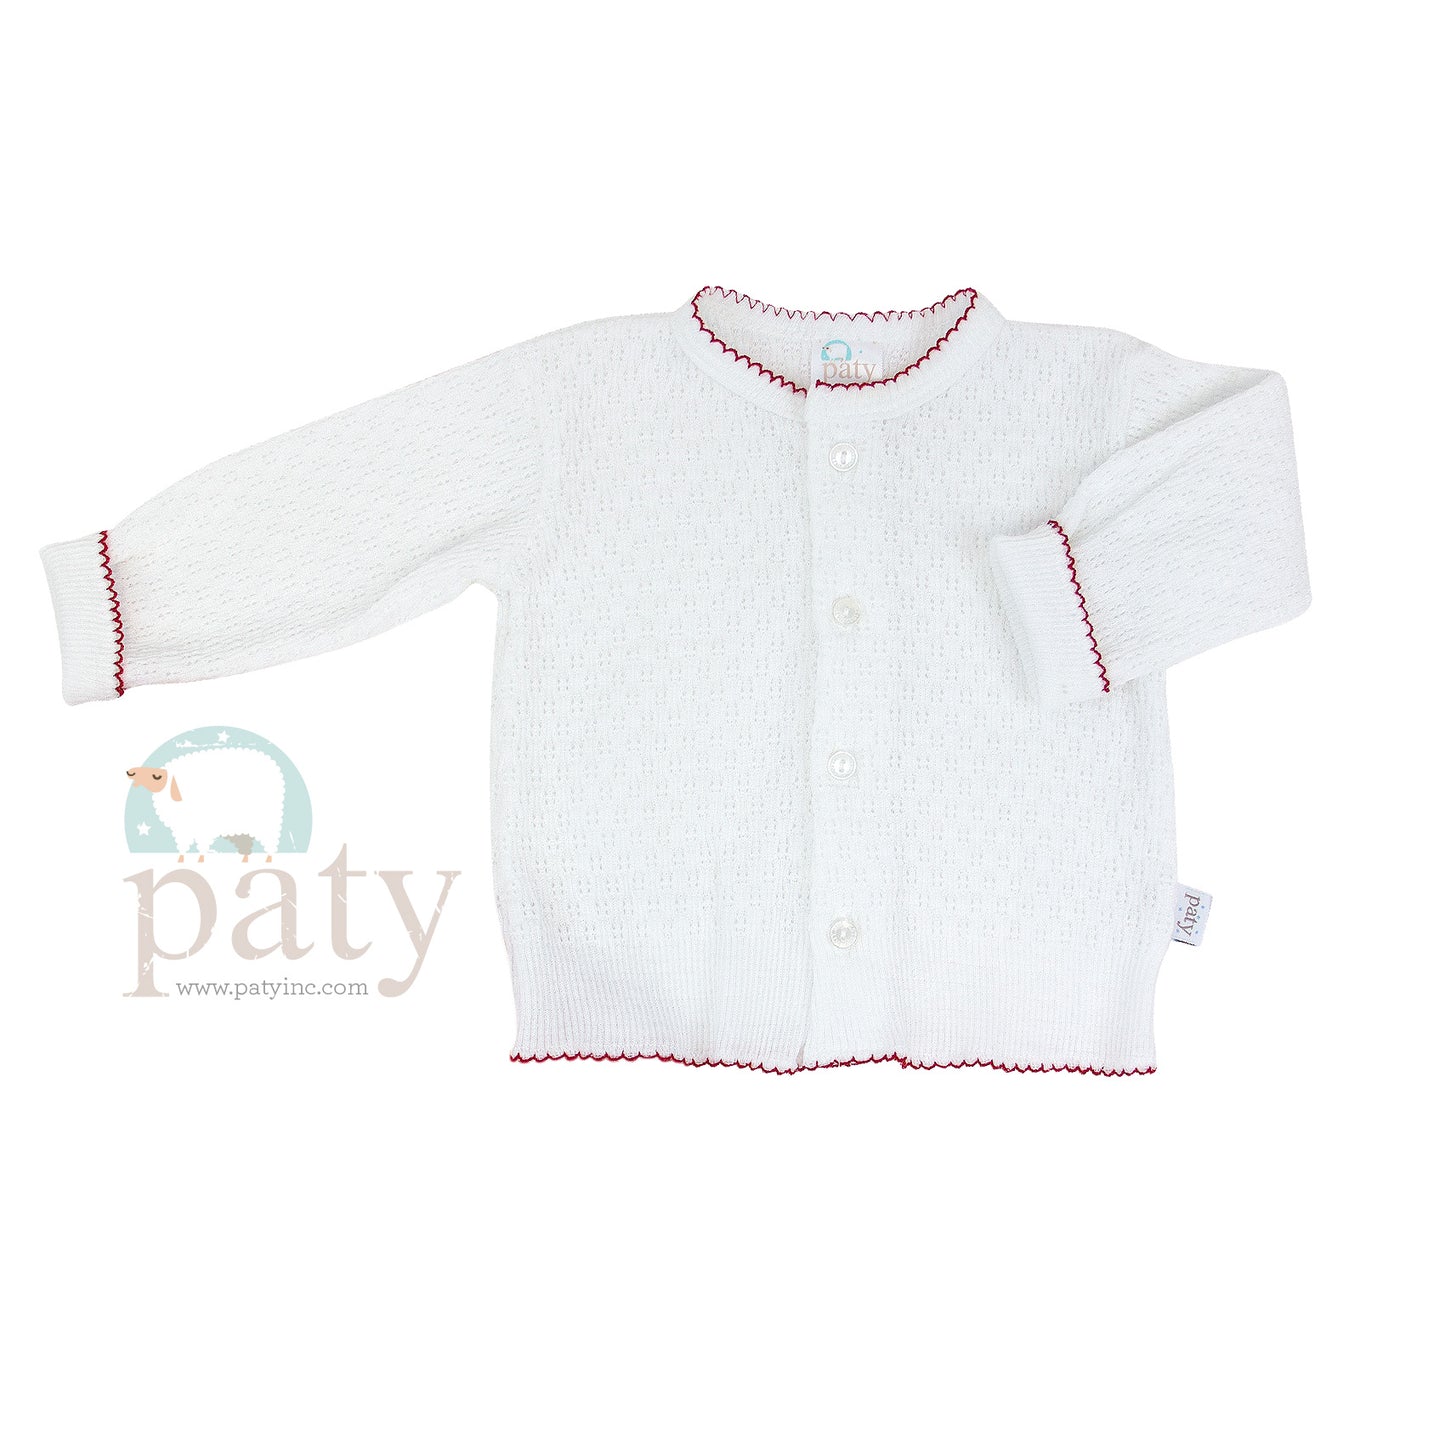 Paty Knit LS Button Up White Cardigan Sweater with Red Trim